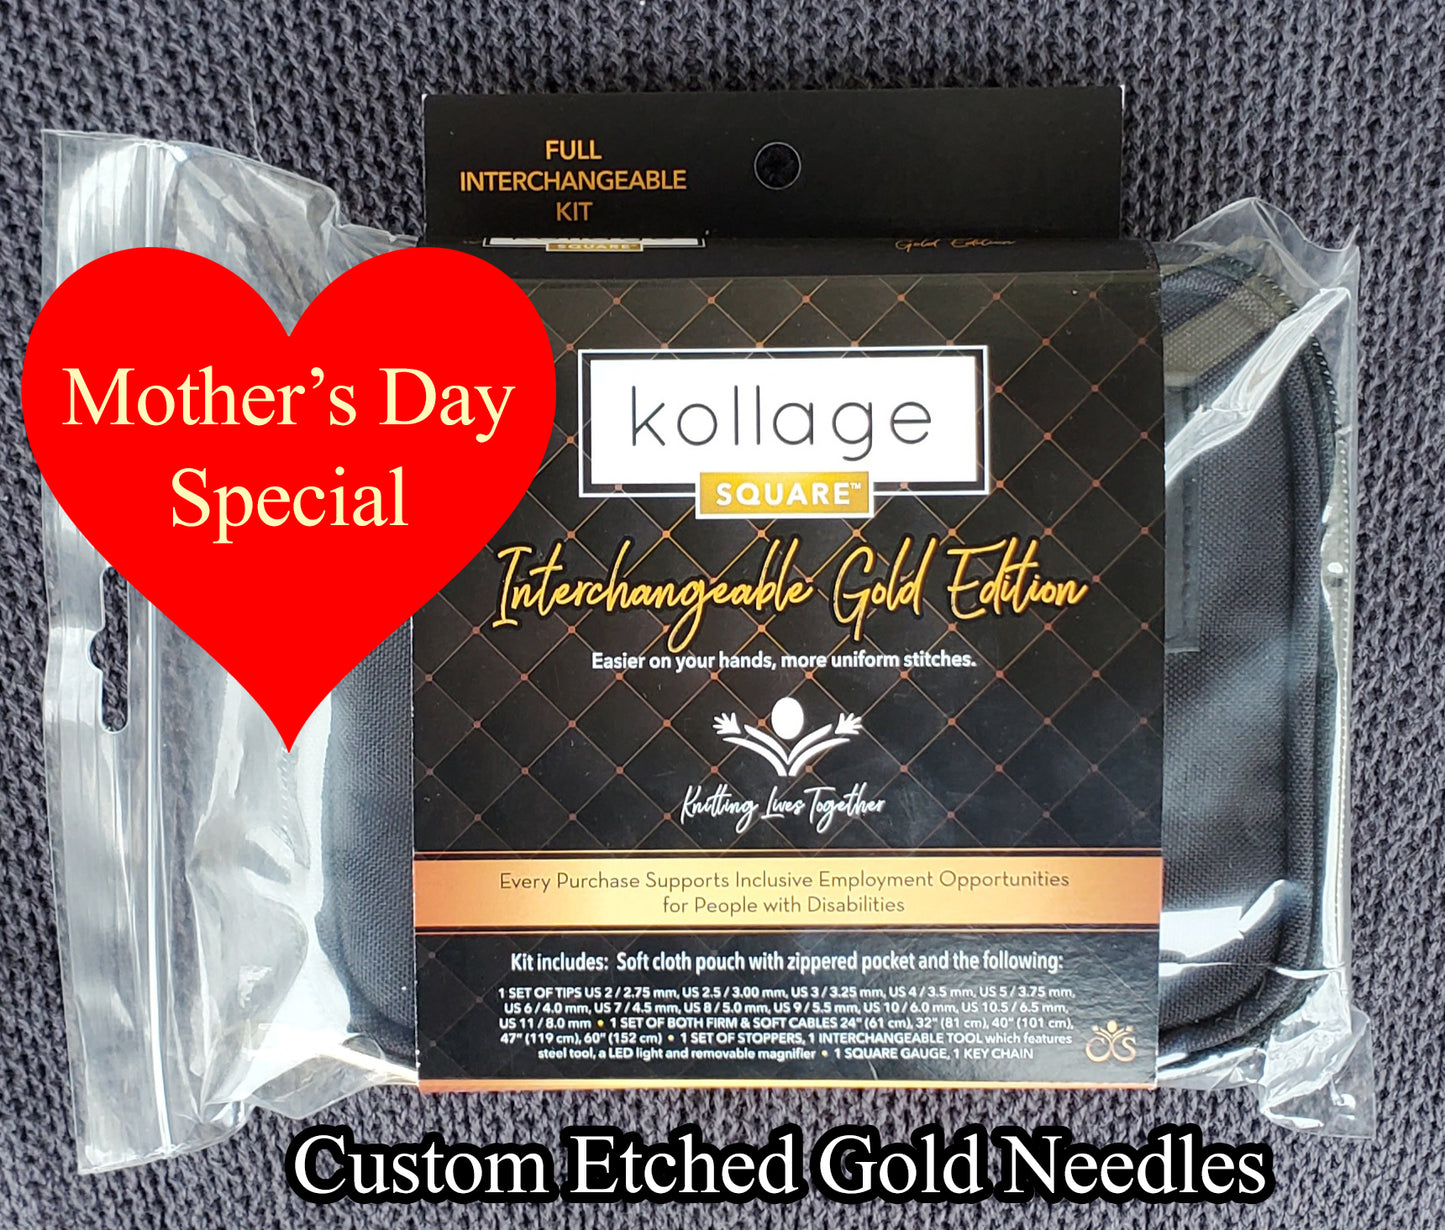 Interchangeable Full Set - 5.5" - GOLD - Mother's Day